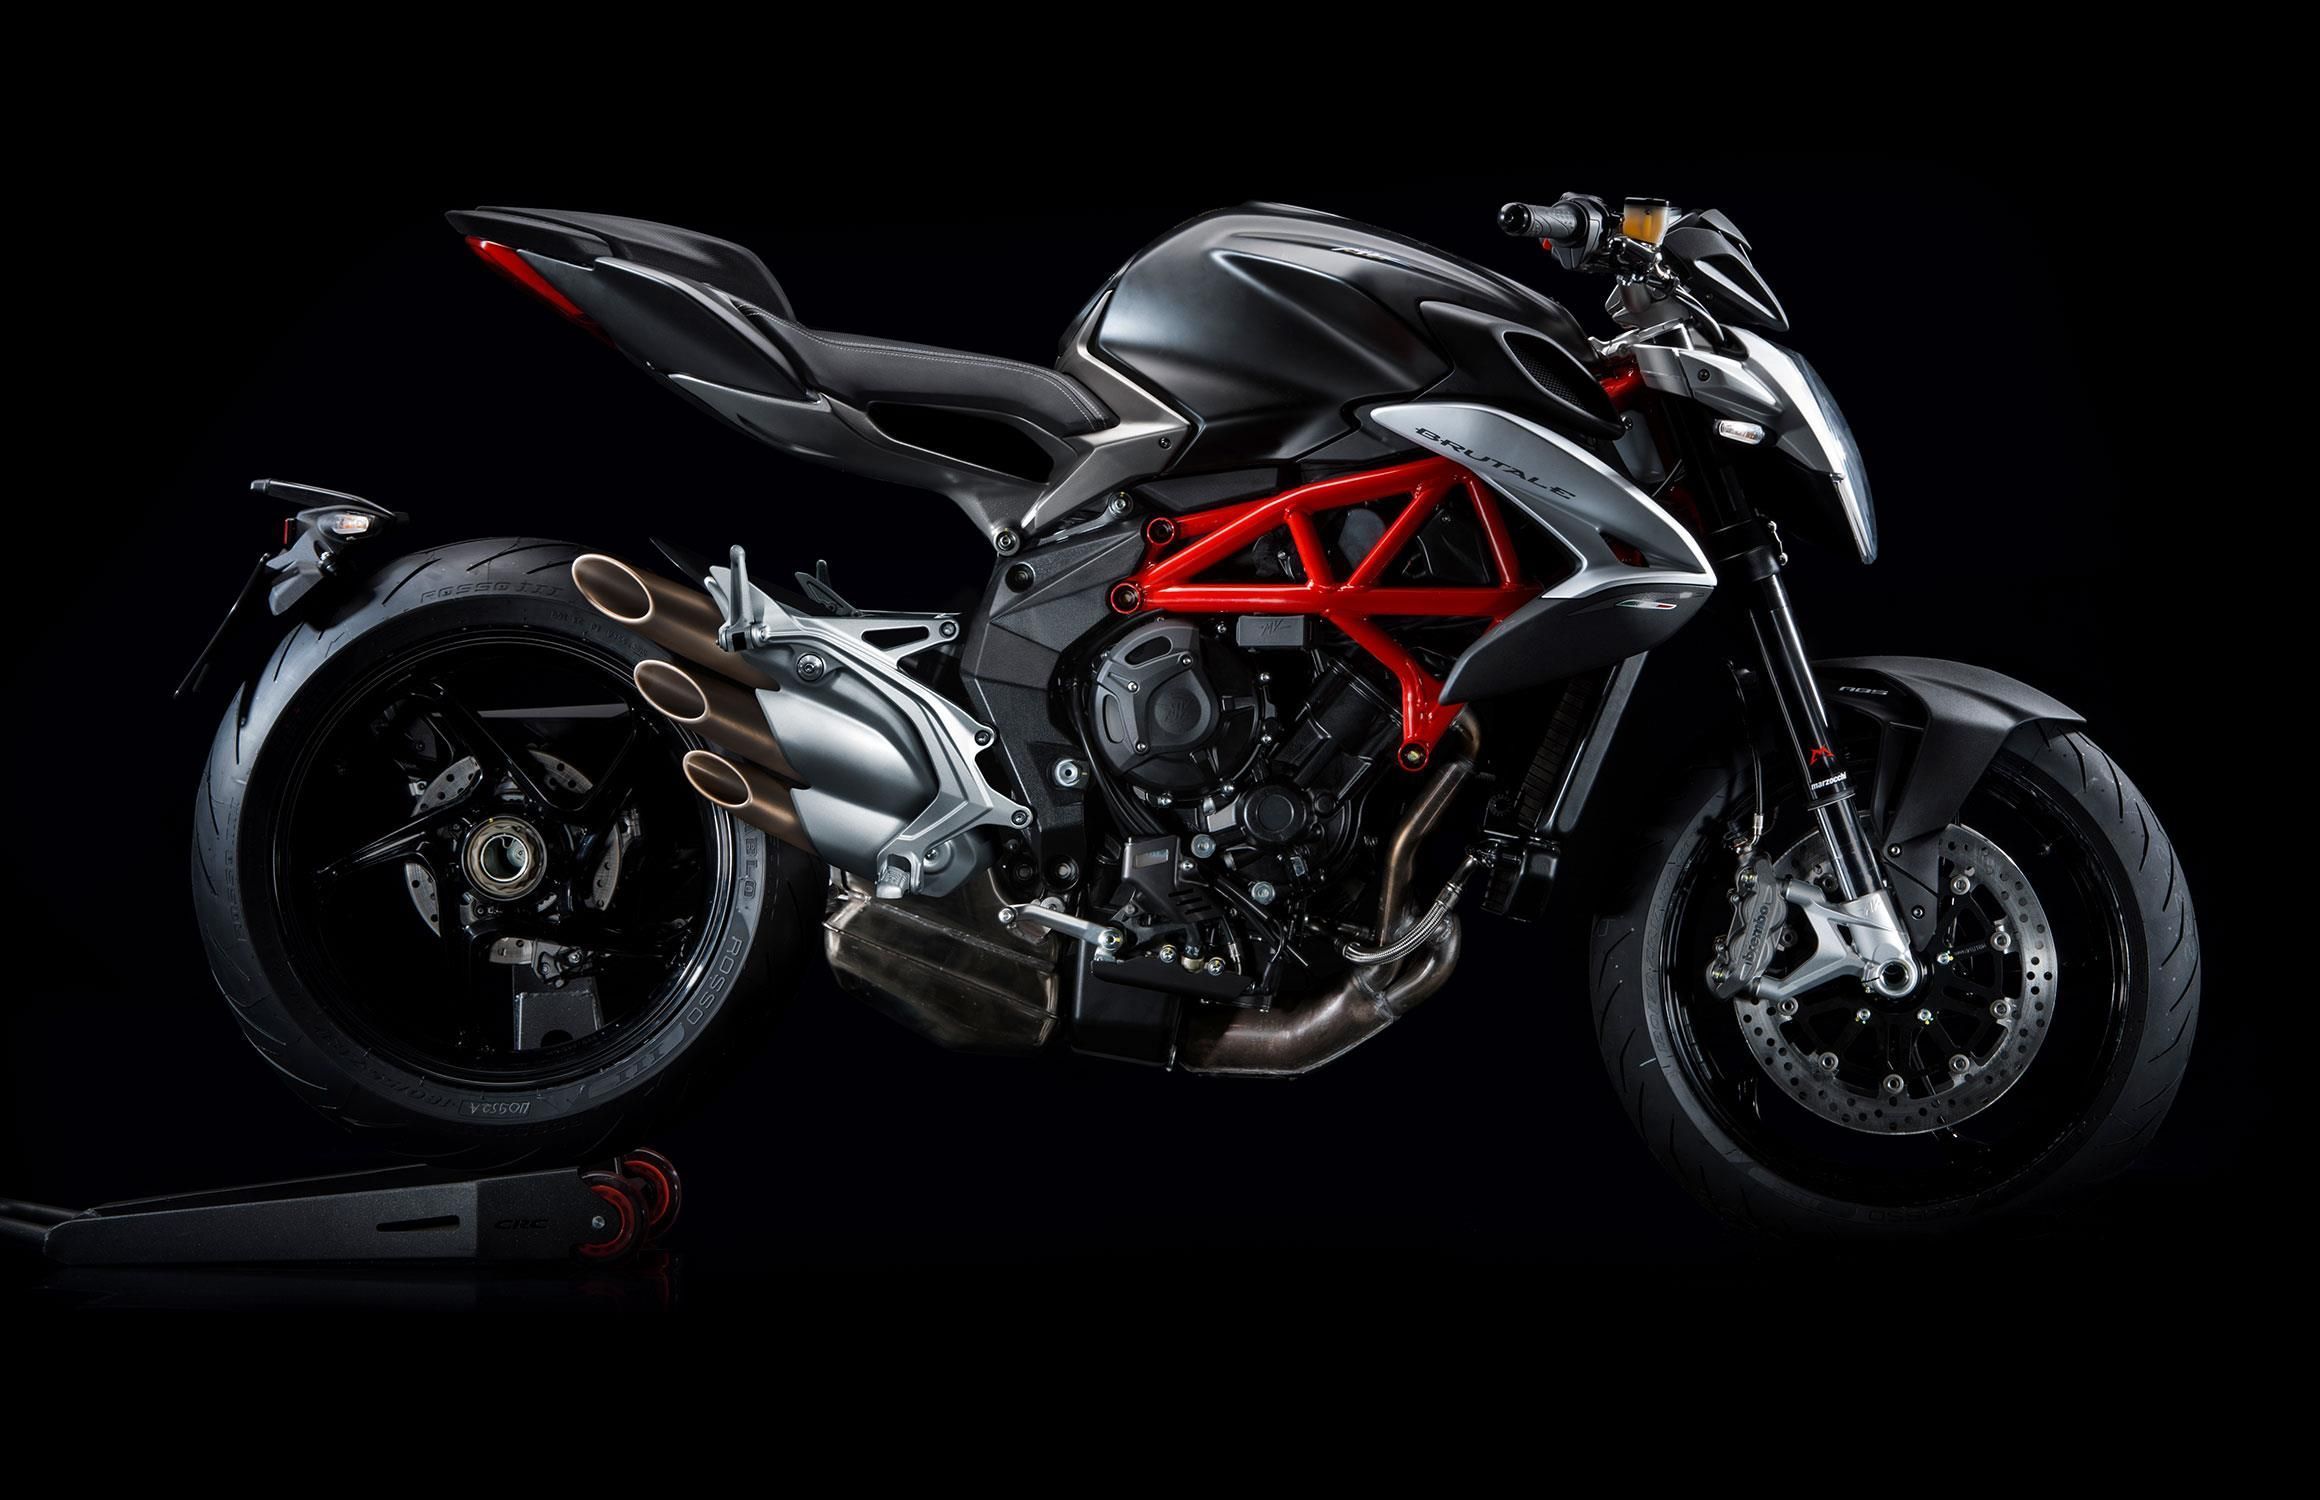 2017 MV Agusta Brutale 800 Launched At Rs 15.59 lakh (ex-showroom, pan-India)